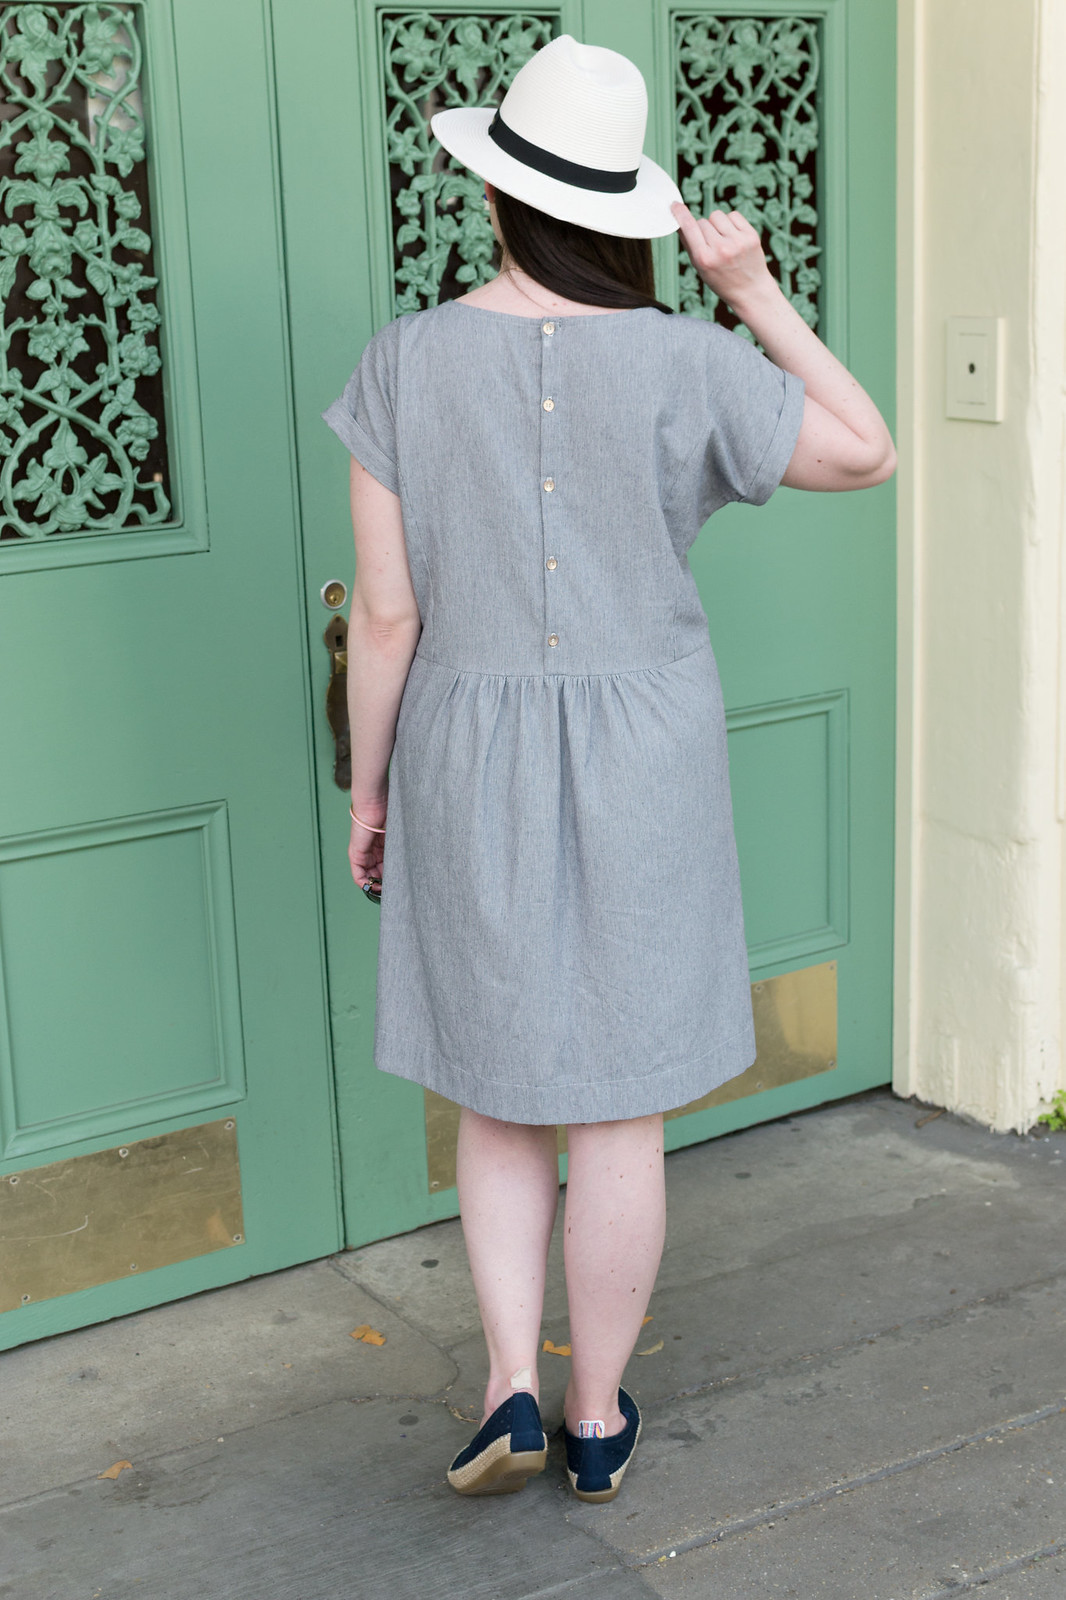 Invisible Zipper Tutorial - Fully Lined Dress